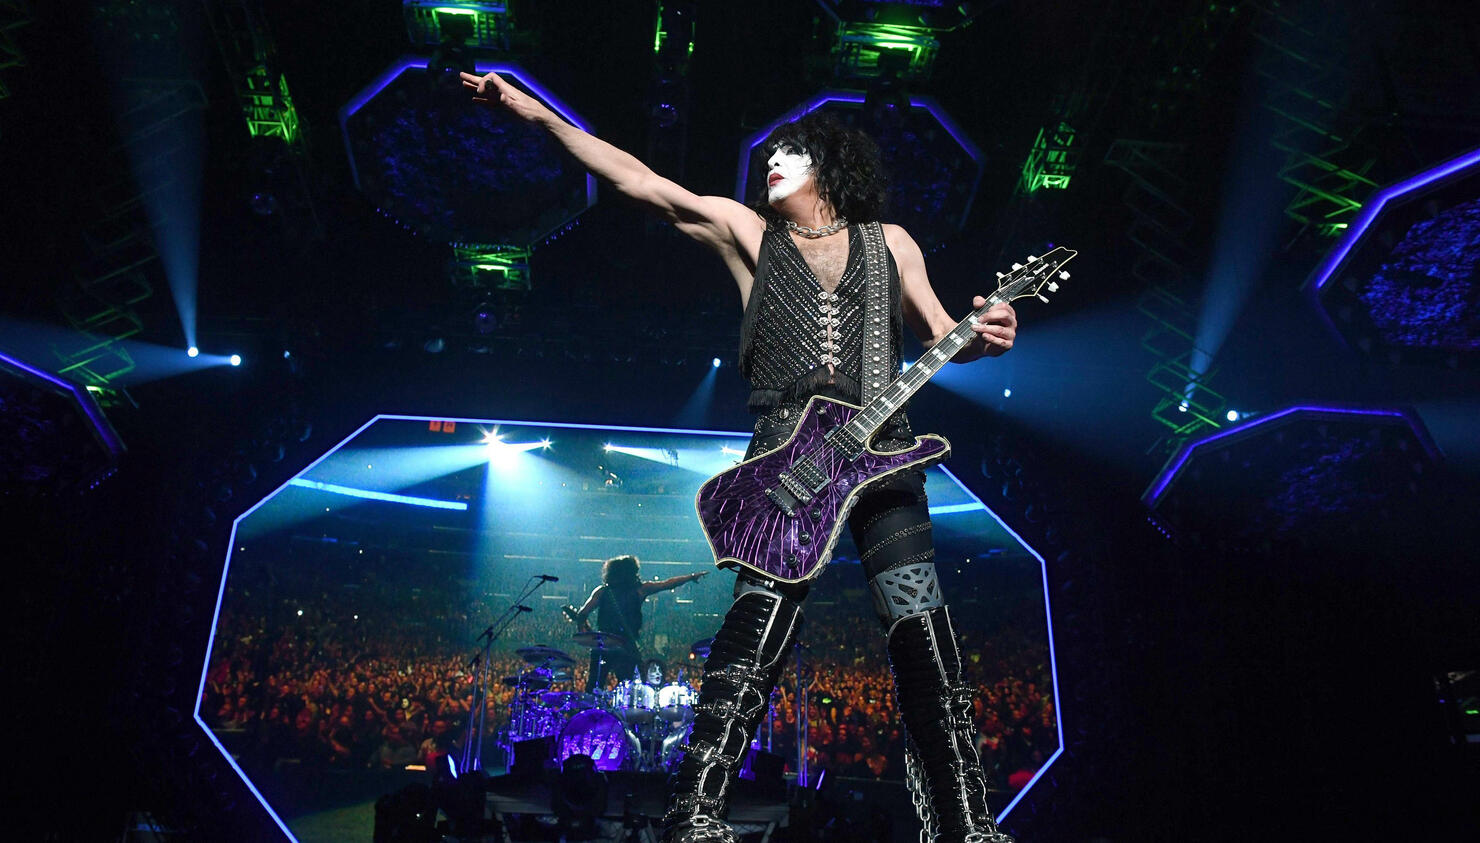 KISS Performs At Staples Center